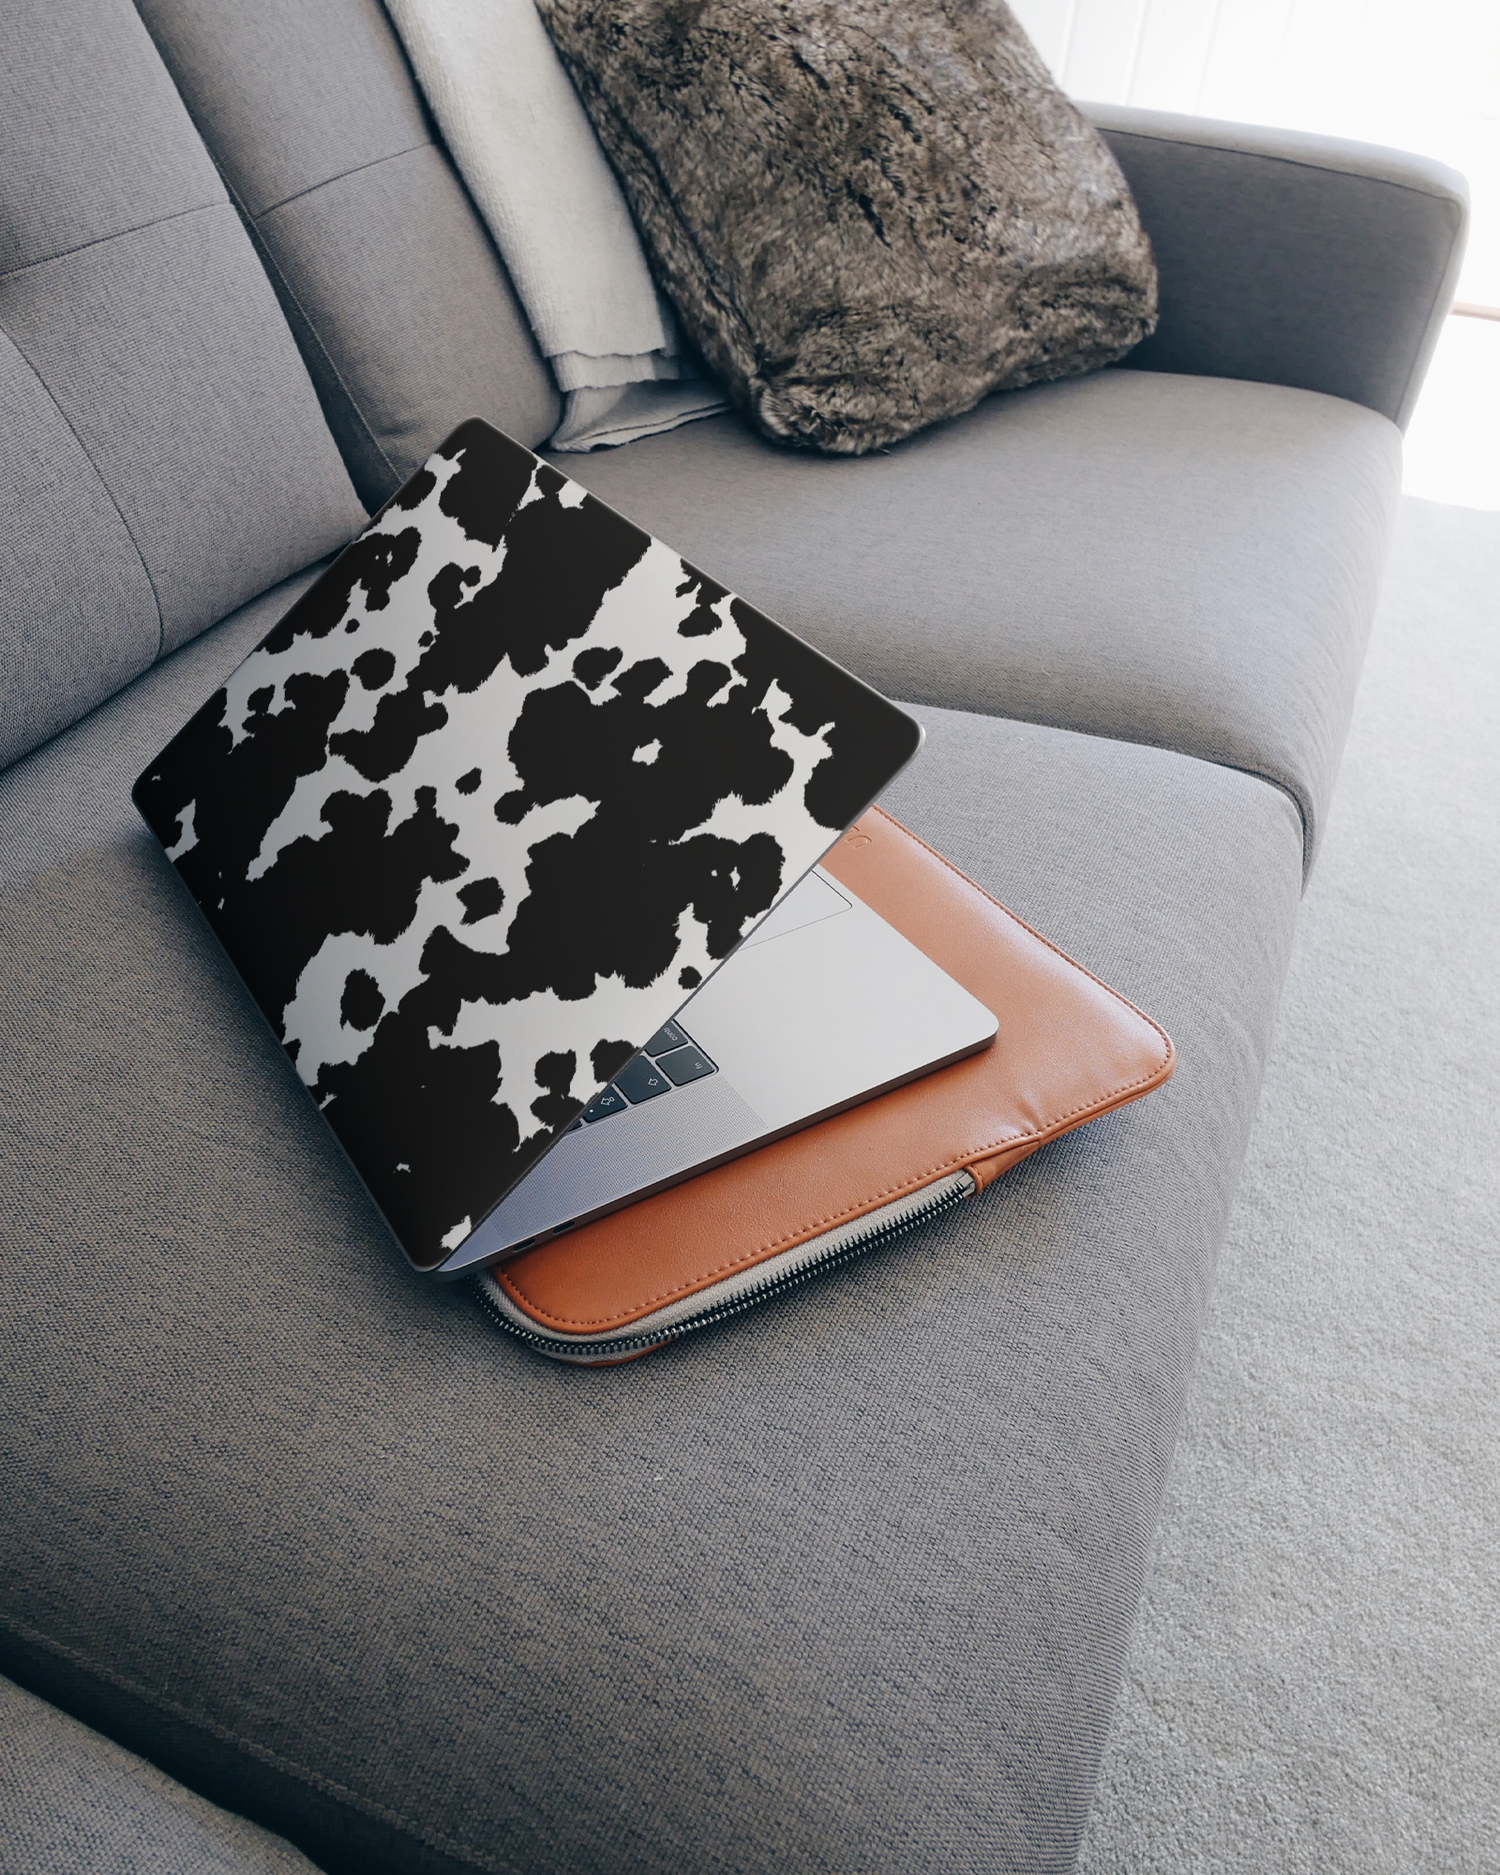 Cow Print Laptop Skin for 15 inch Apple MacBooks on a couch